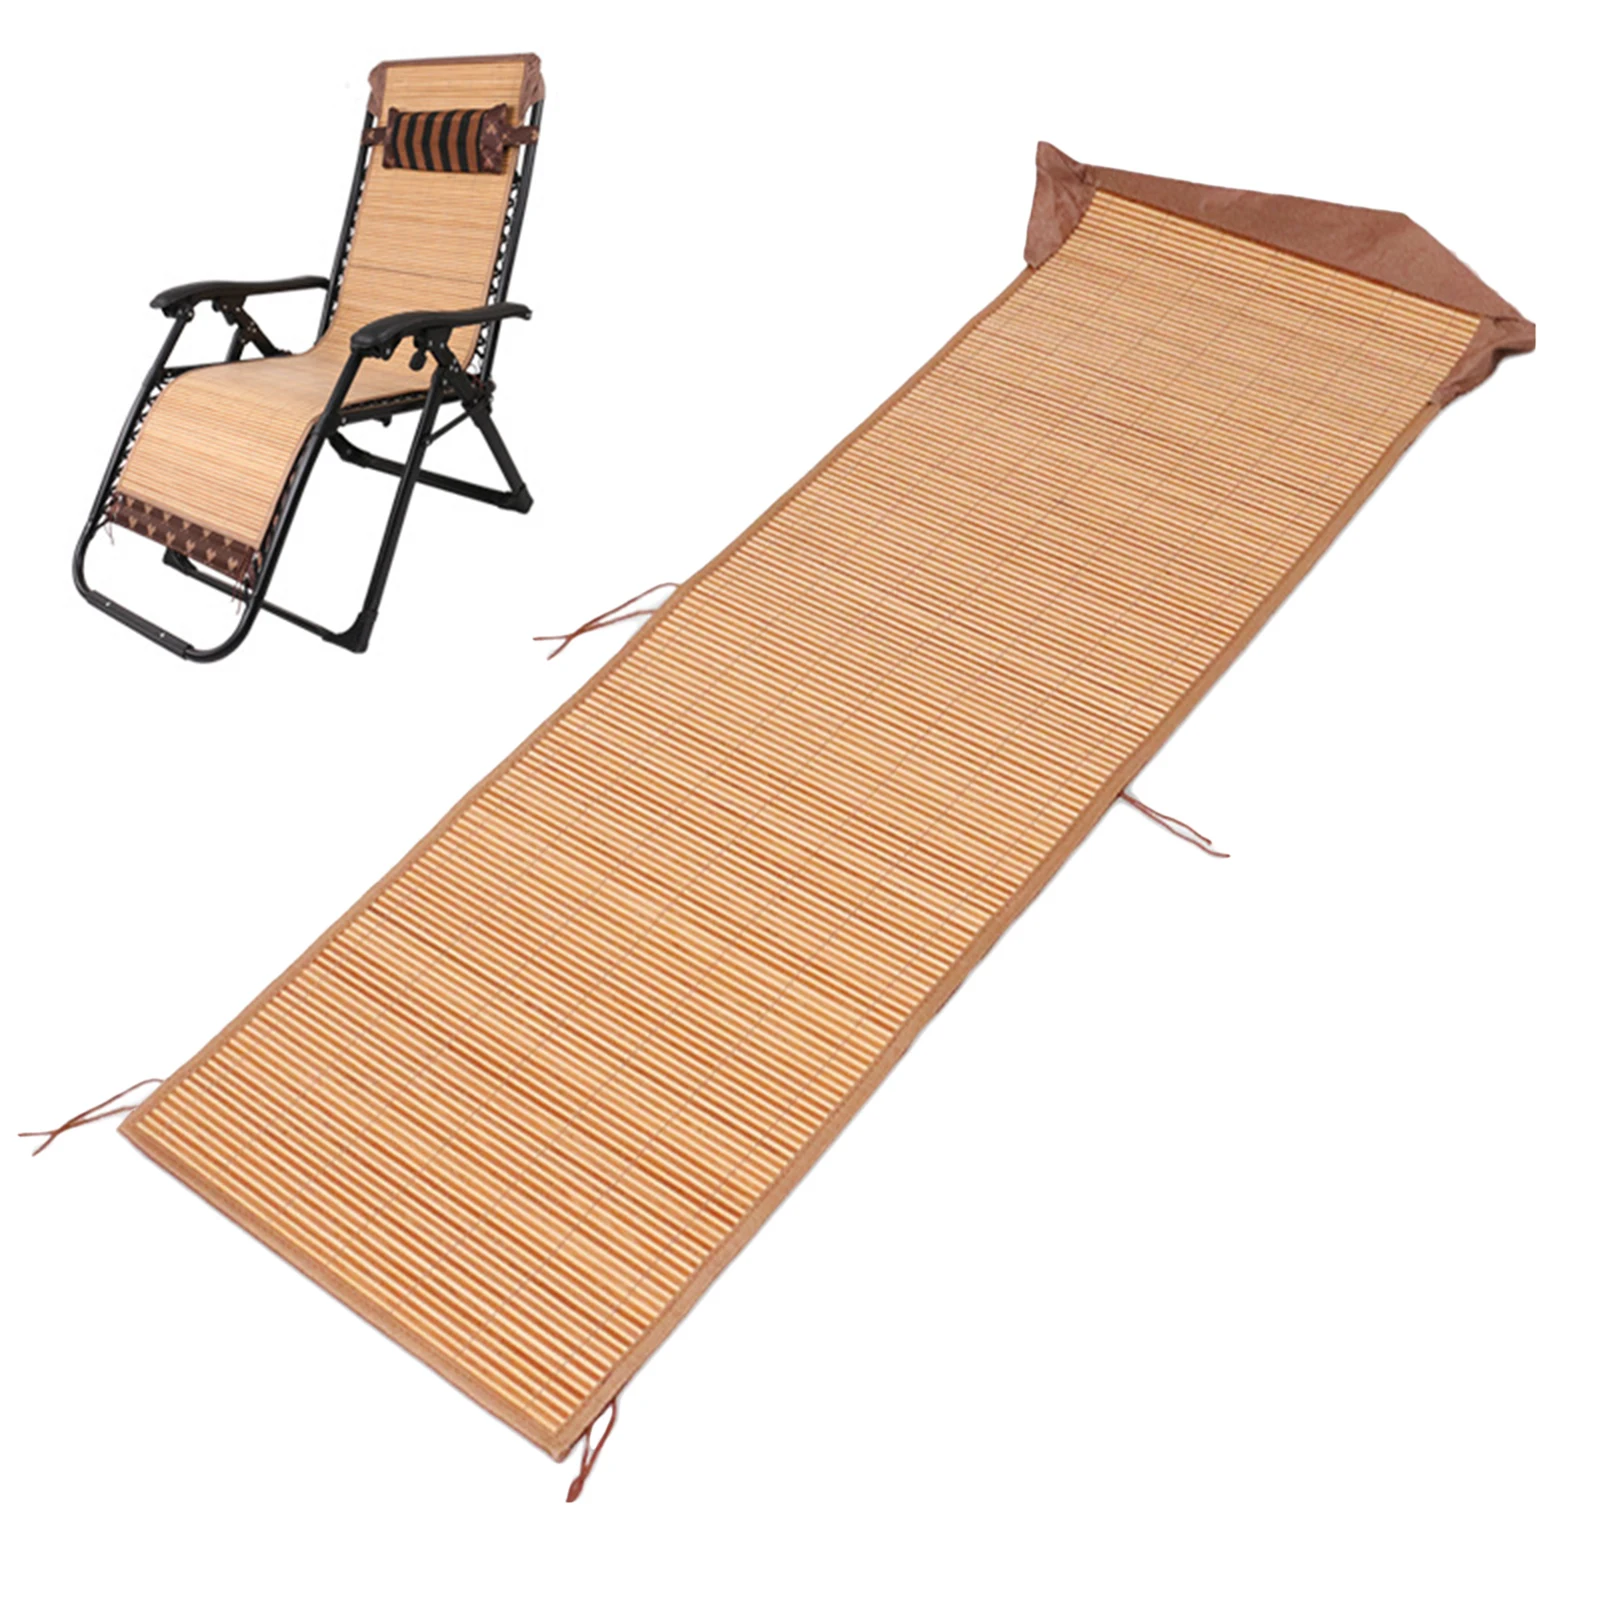 Universal Insulation Replacement Bamboo Mat Cover for Recliners Backyard Beach Pool Lounge Chair